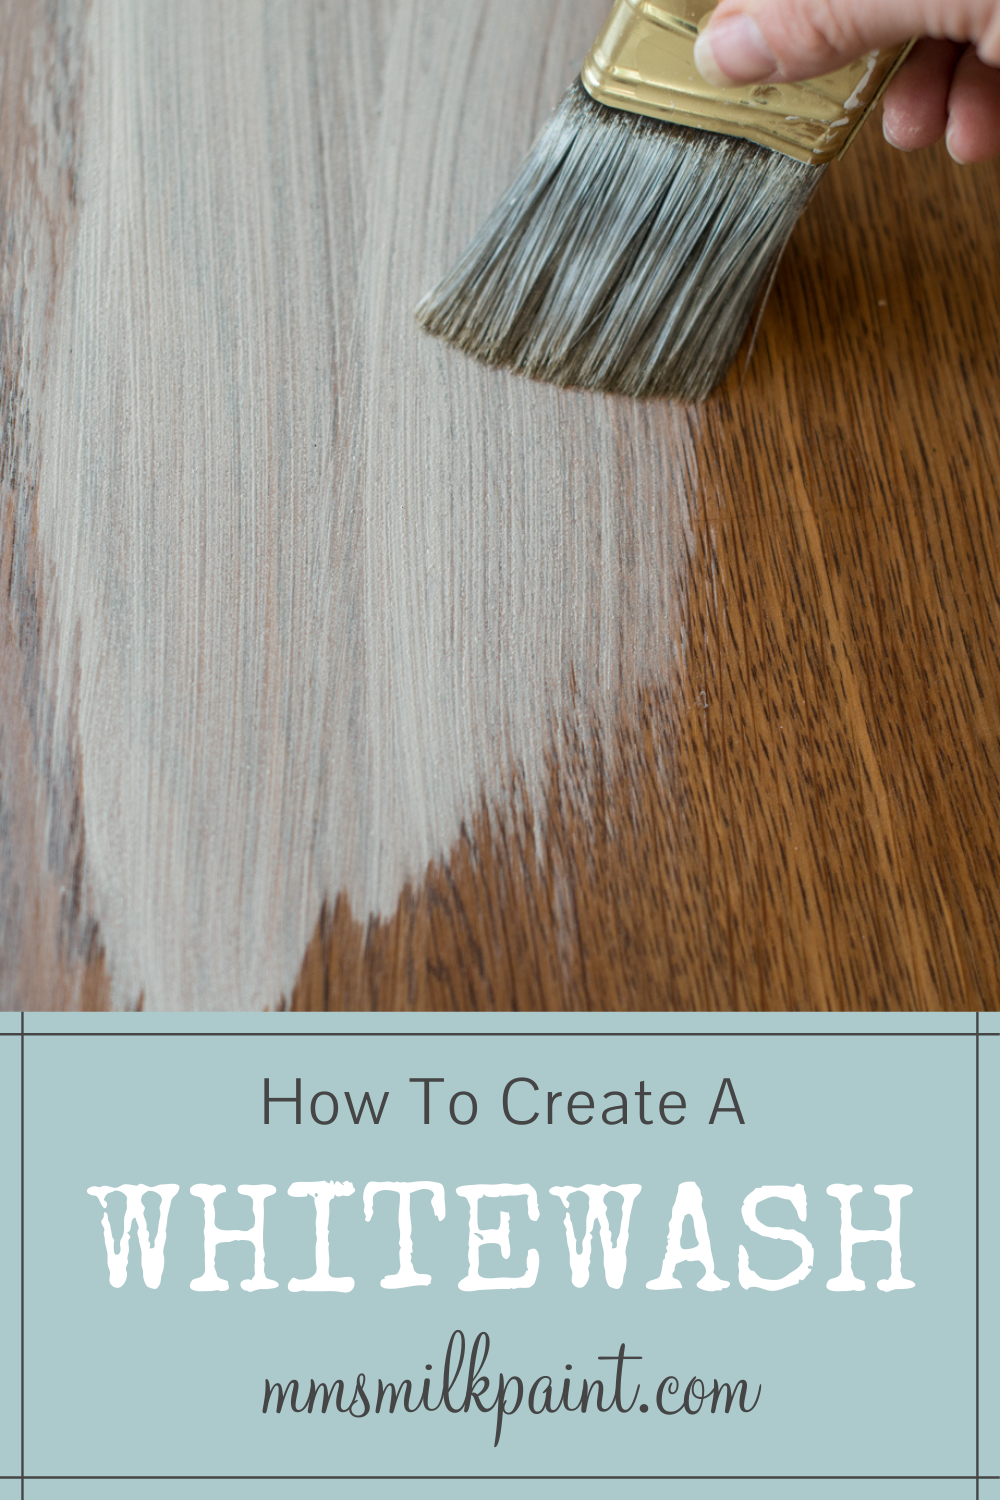 How to Use White-Wash